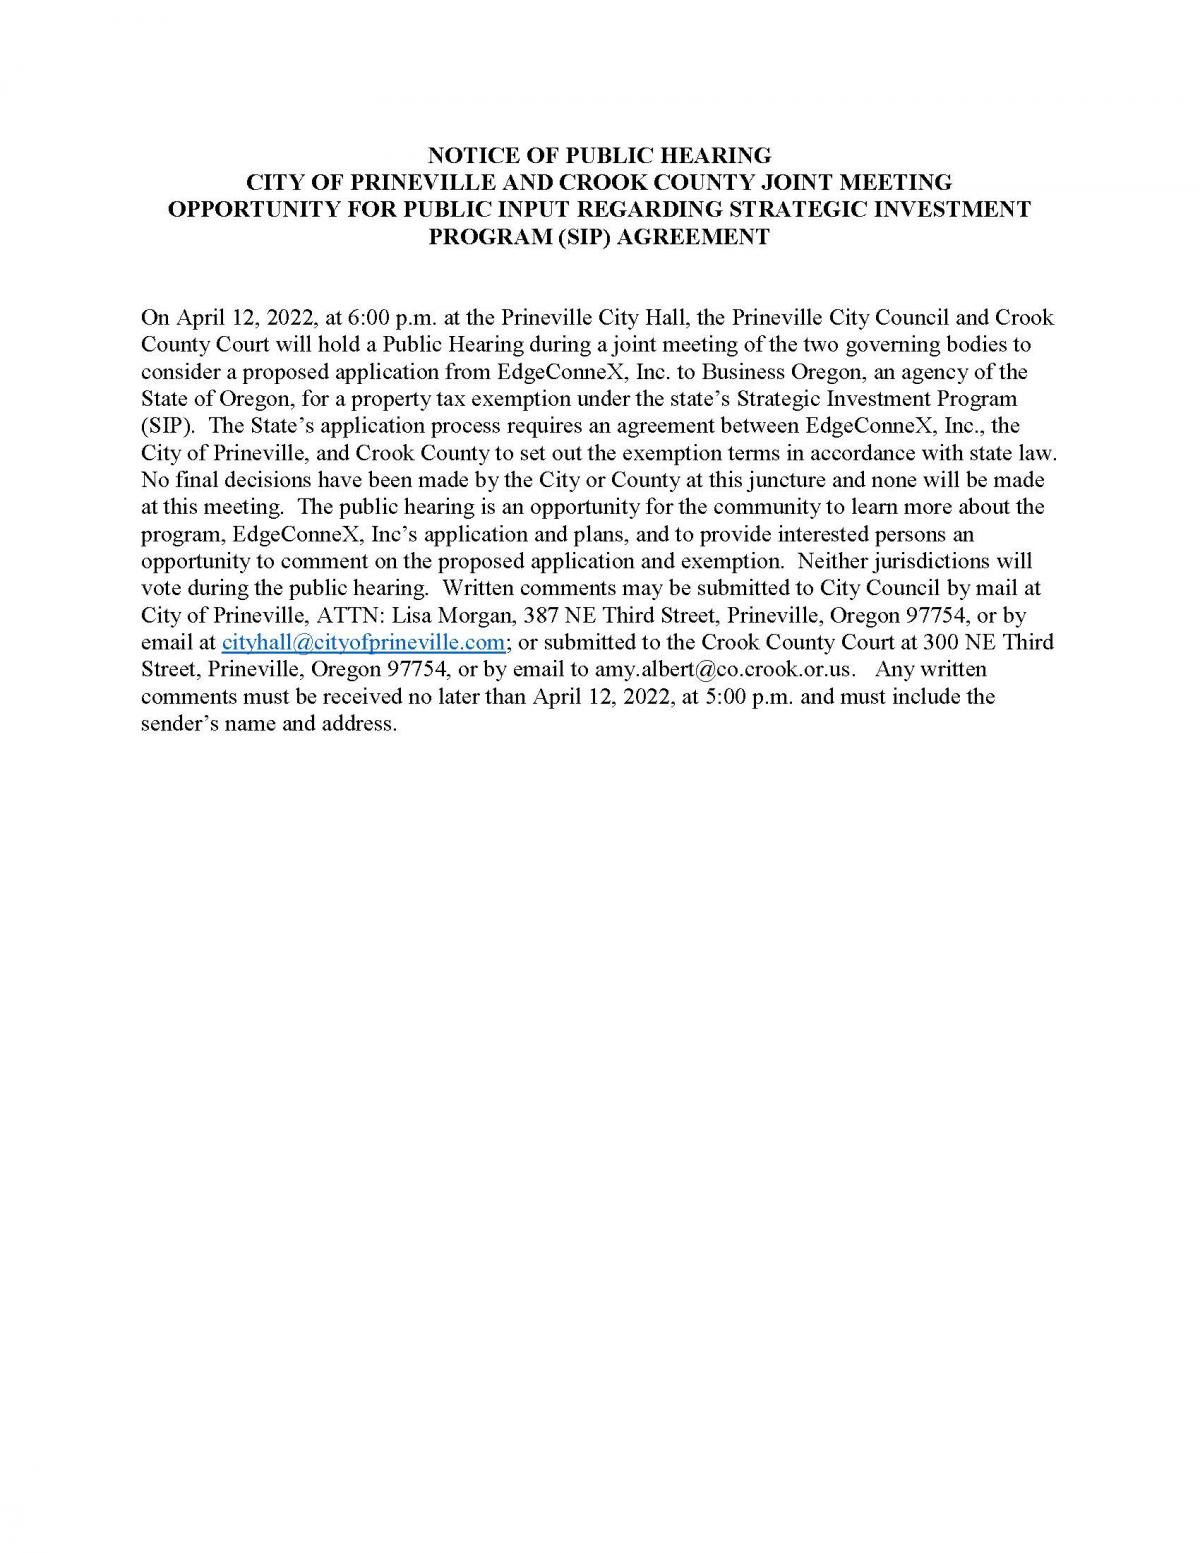 Public Notice - Joint City - County Public Hearing 4-12-2022